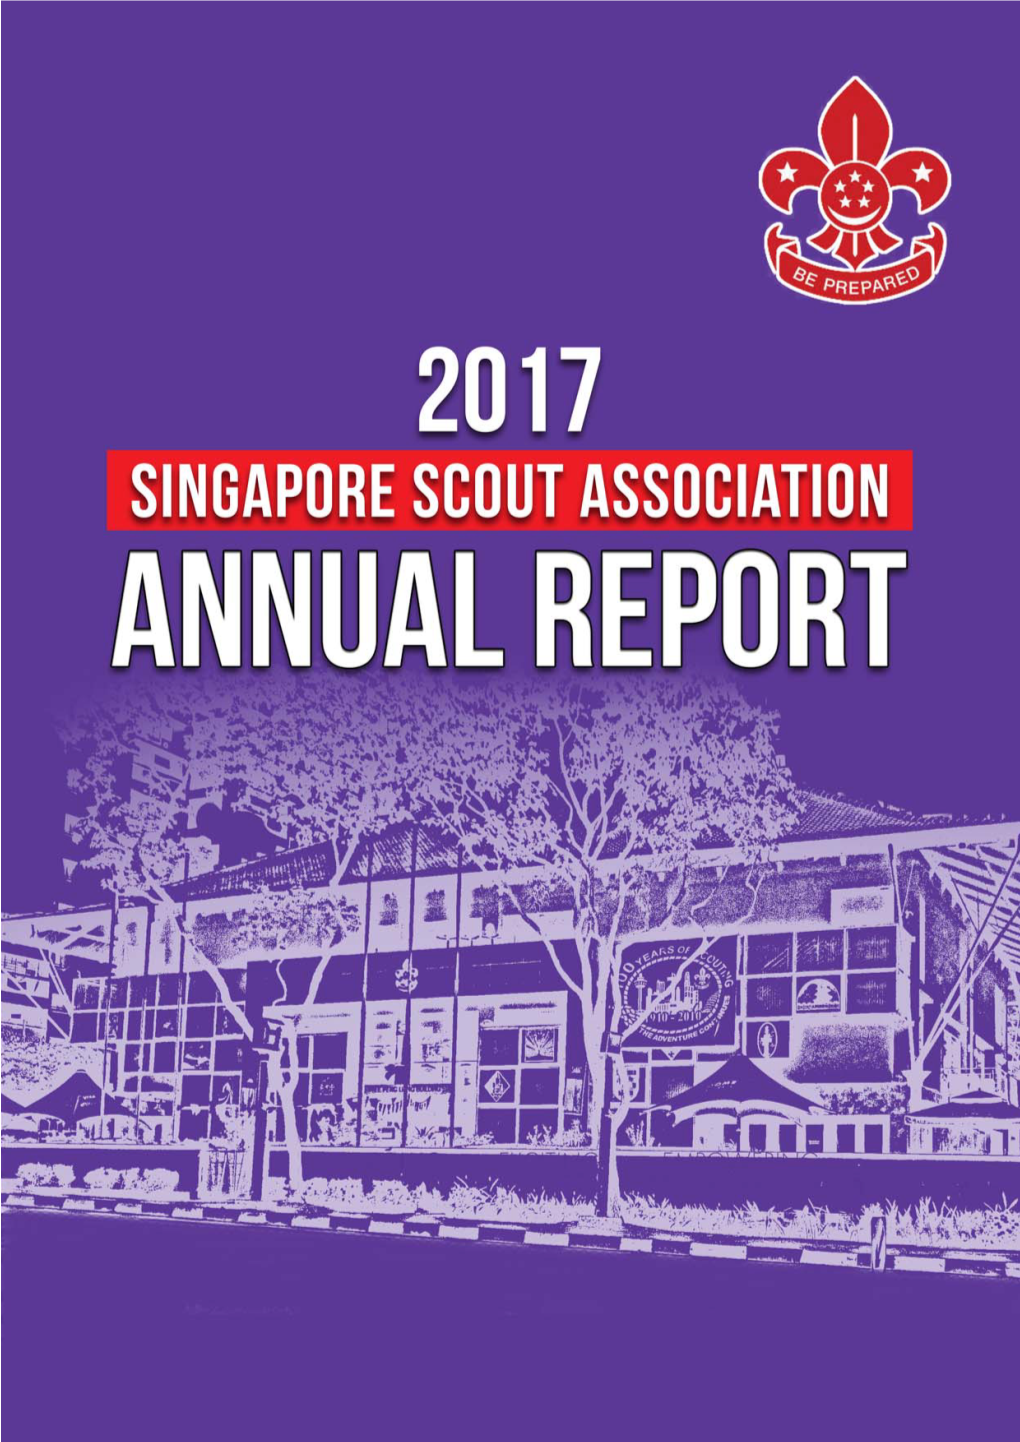 Annual Report 2017 the Singapore Scout Association